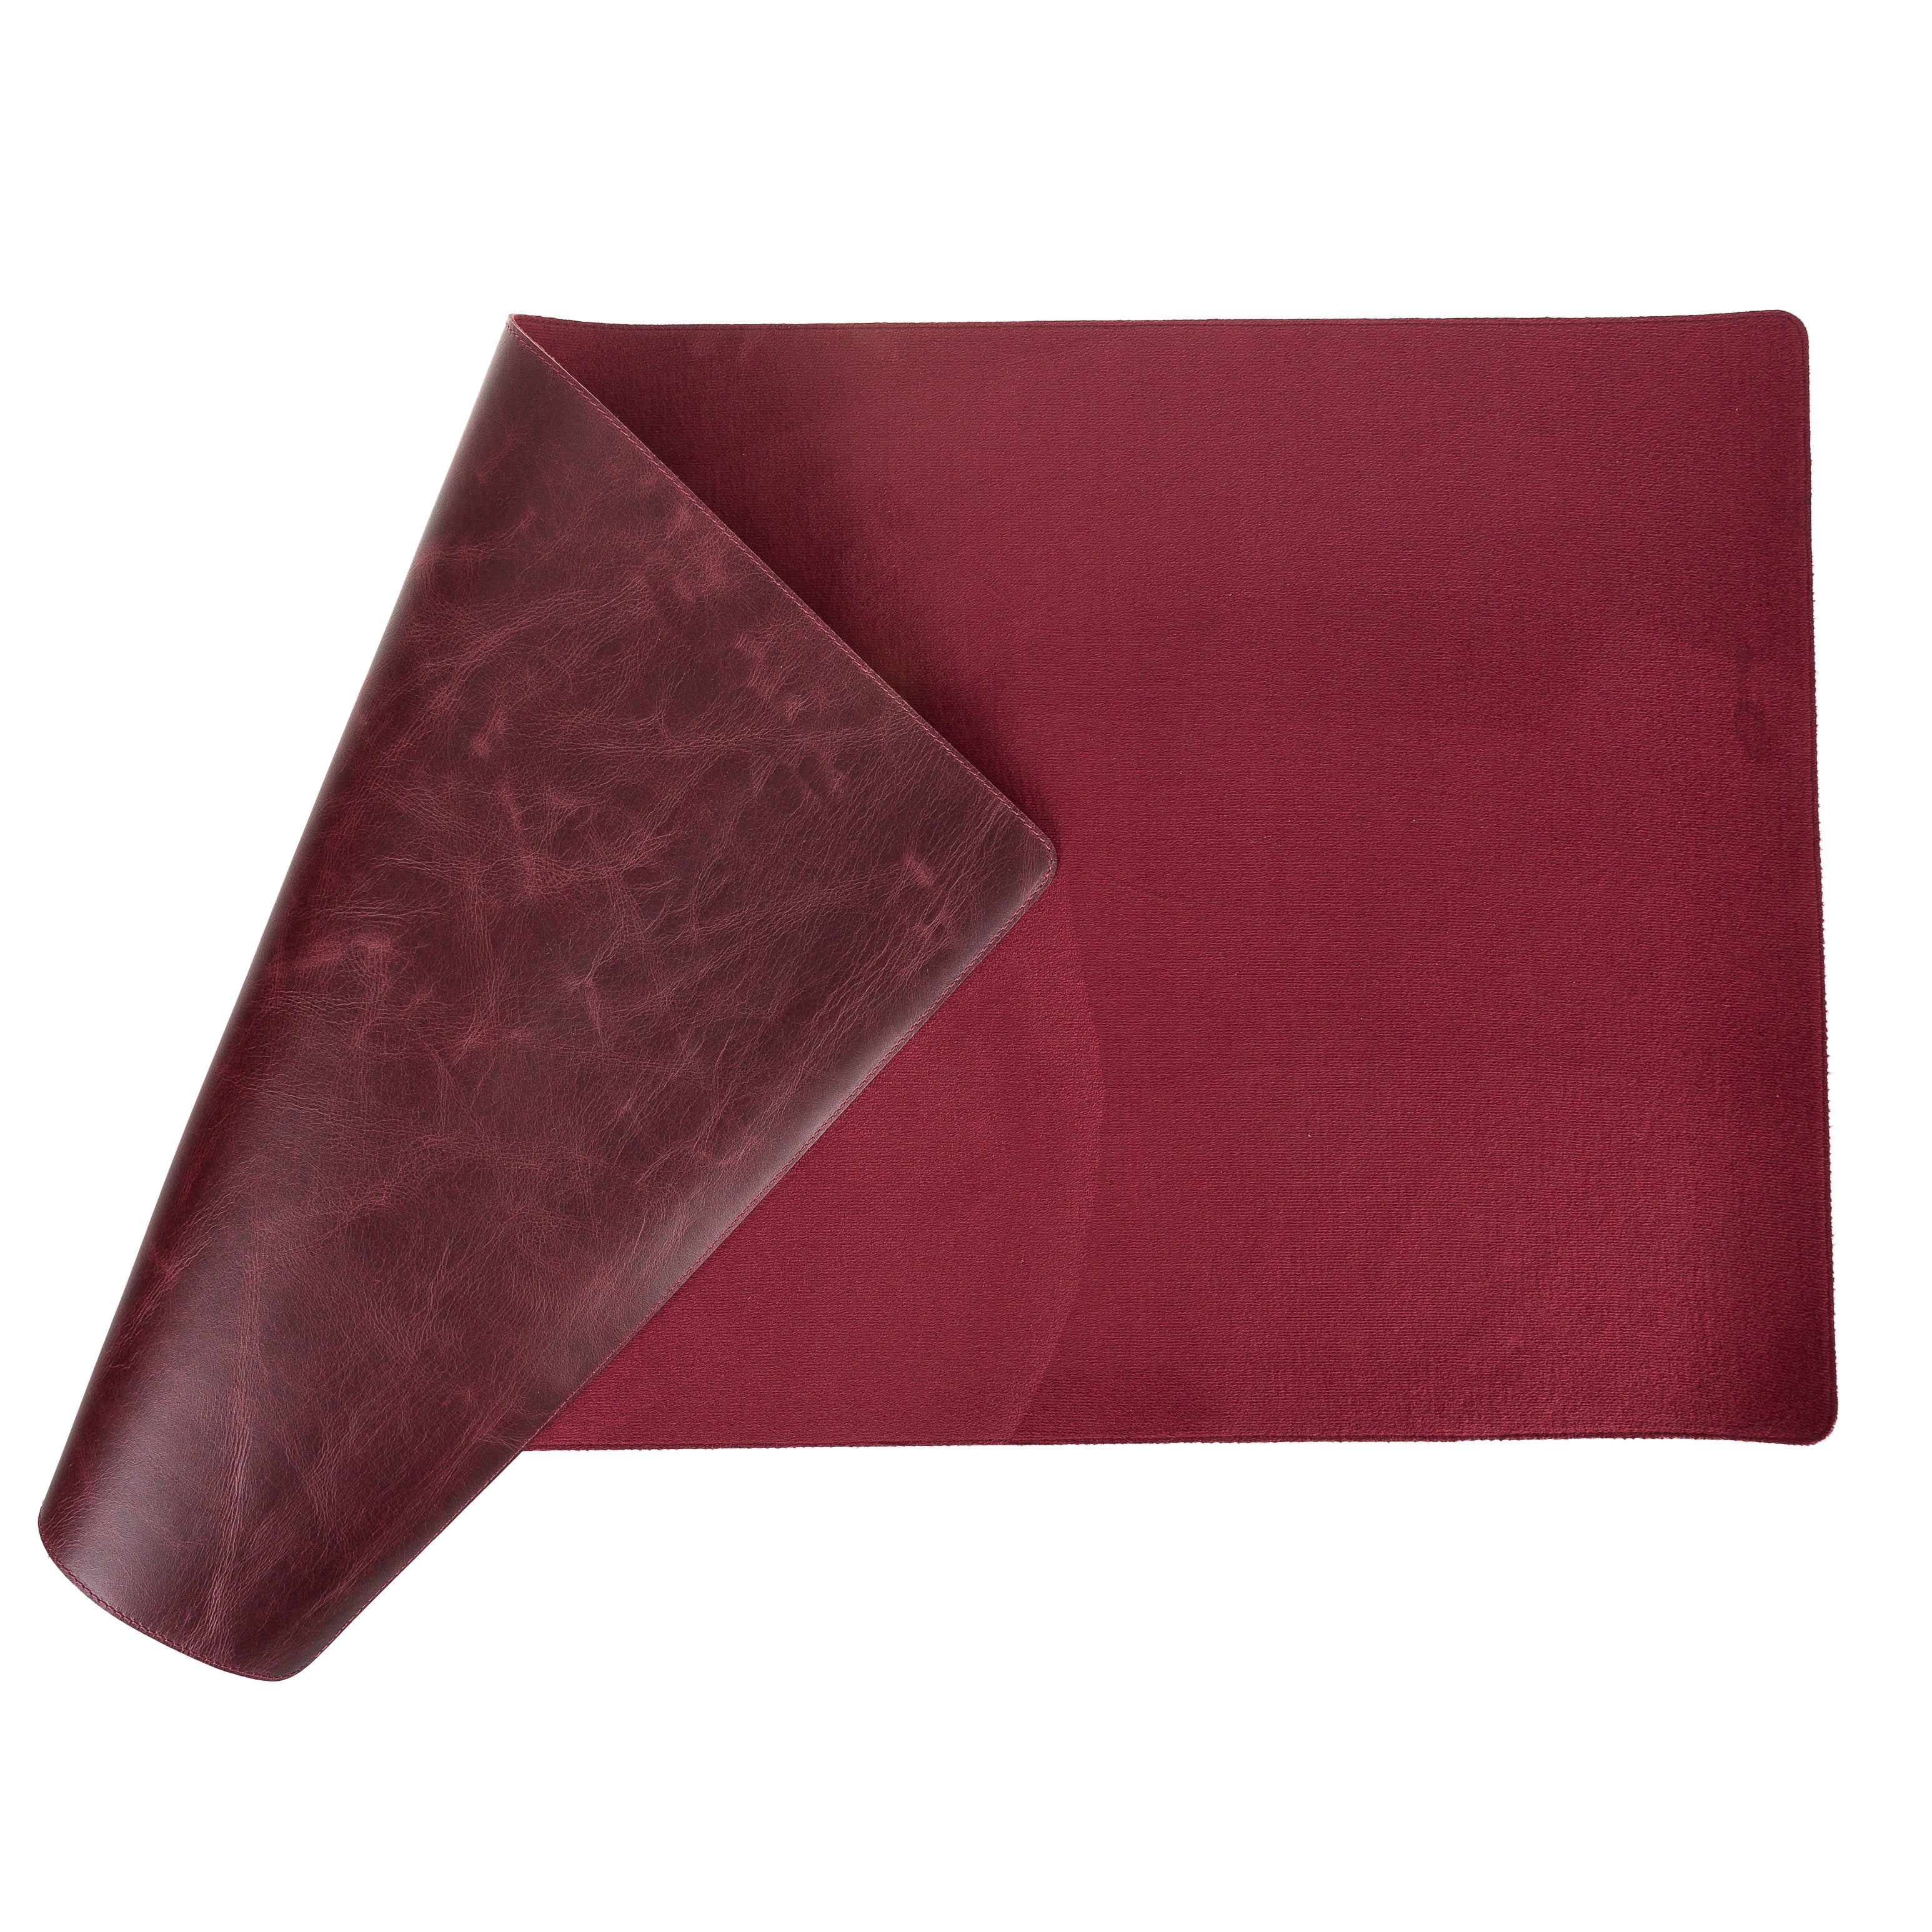 LupinnyLeather Genuine Cherry Leather Deskmat, Computer Pad, Office Desk Pad 7